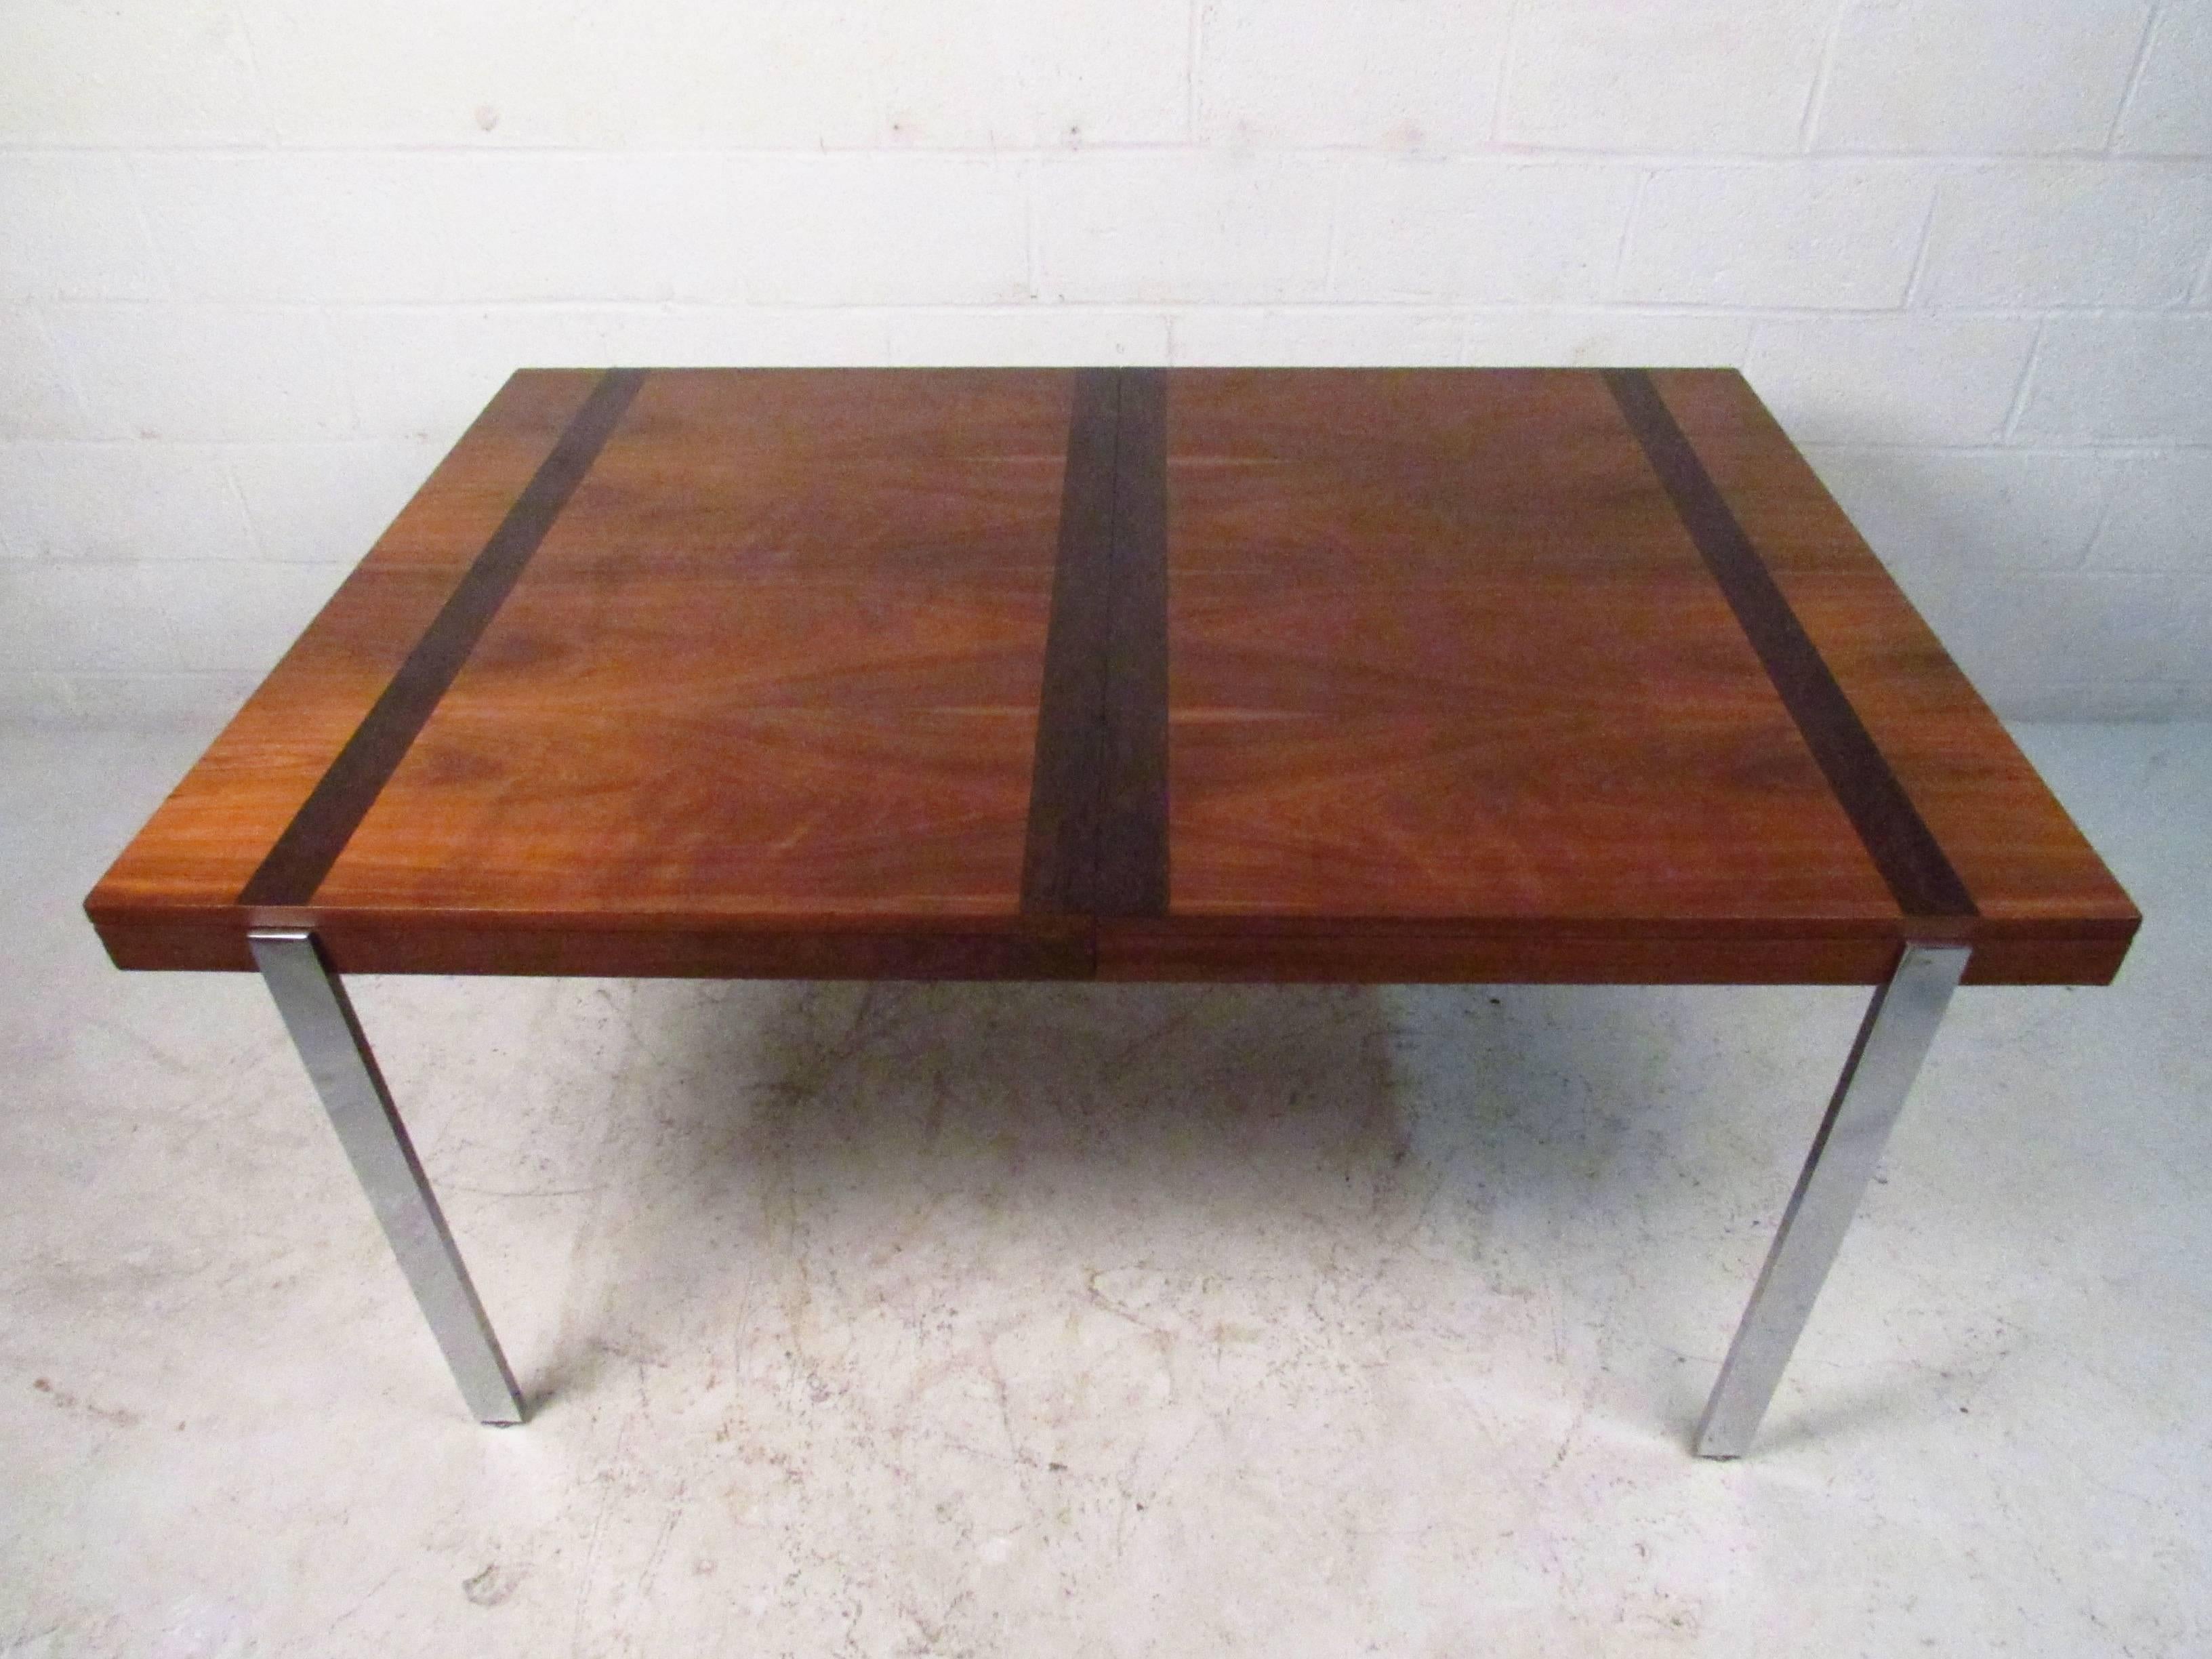 Vintage modern table by Lane with warm walnut grain accented by striking rosewood bands. Strong polished chrome legs add to the attractive modern look and make a lovely addition to kitchen, dining room, or small conference space. 

(Please confirm